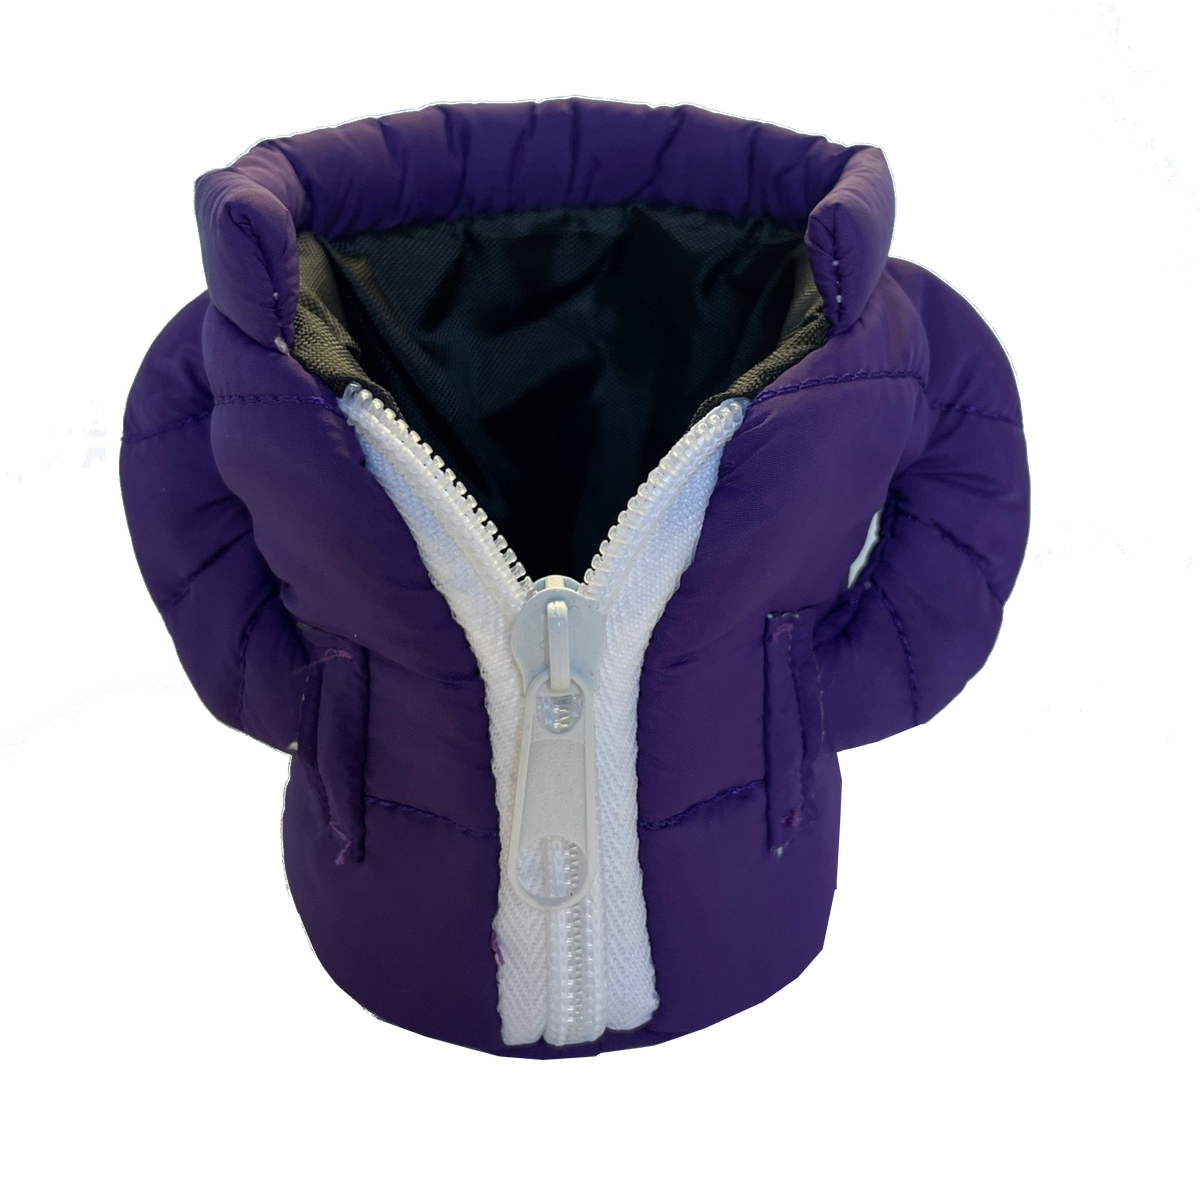 Purple jacket coozie that show the front with a white zipper.